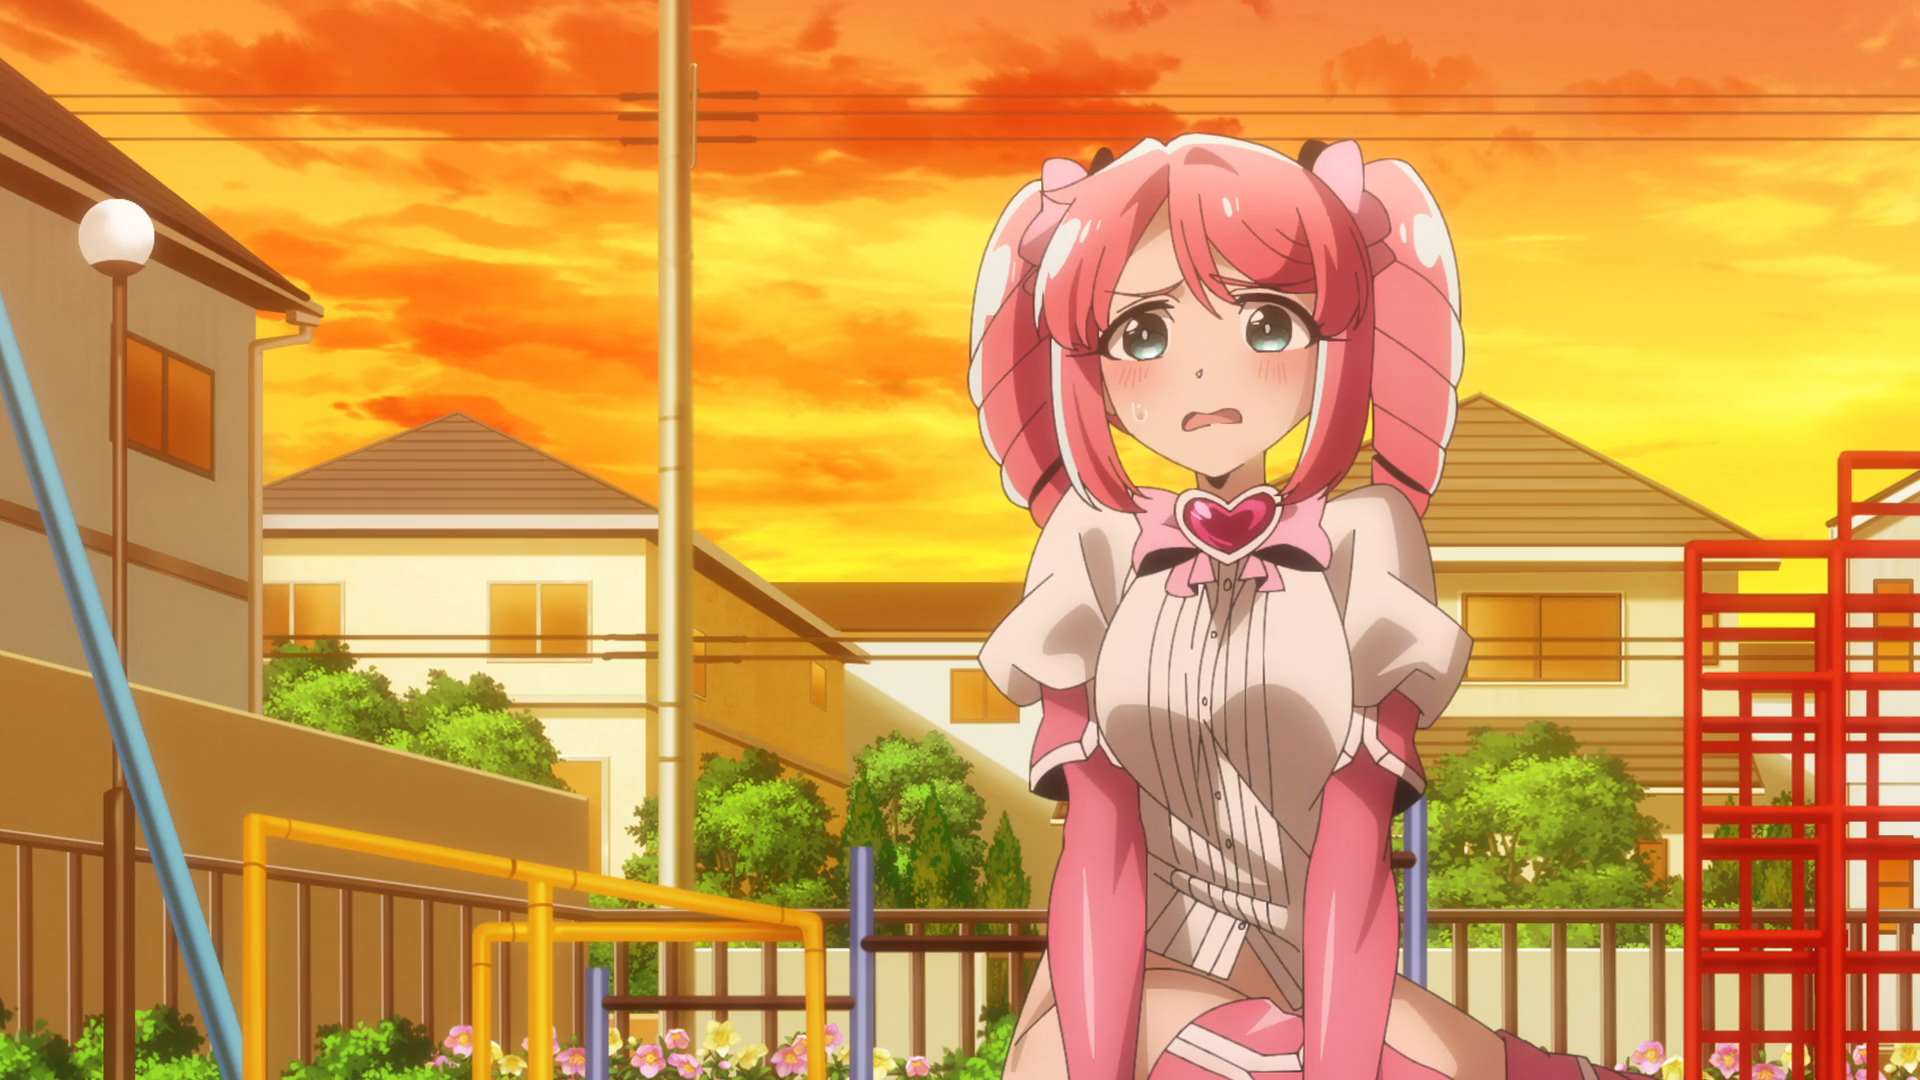 Gushing Over Magical Girls episode 6 shows that Haruka is not only kind, she has the IQ of a watermelon.